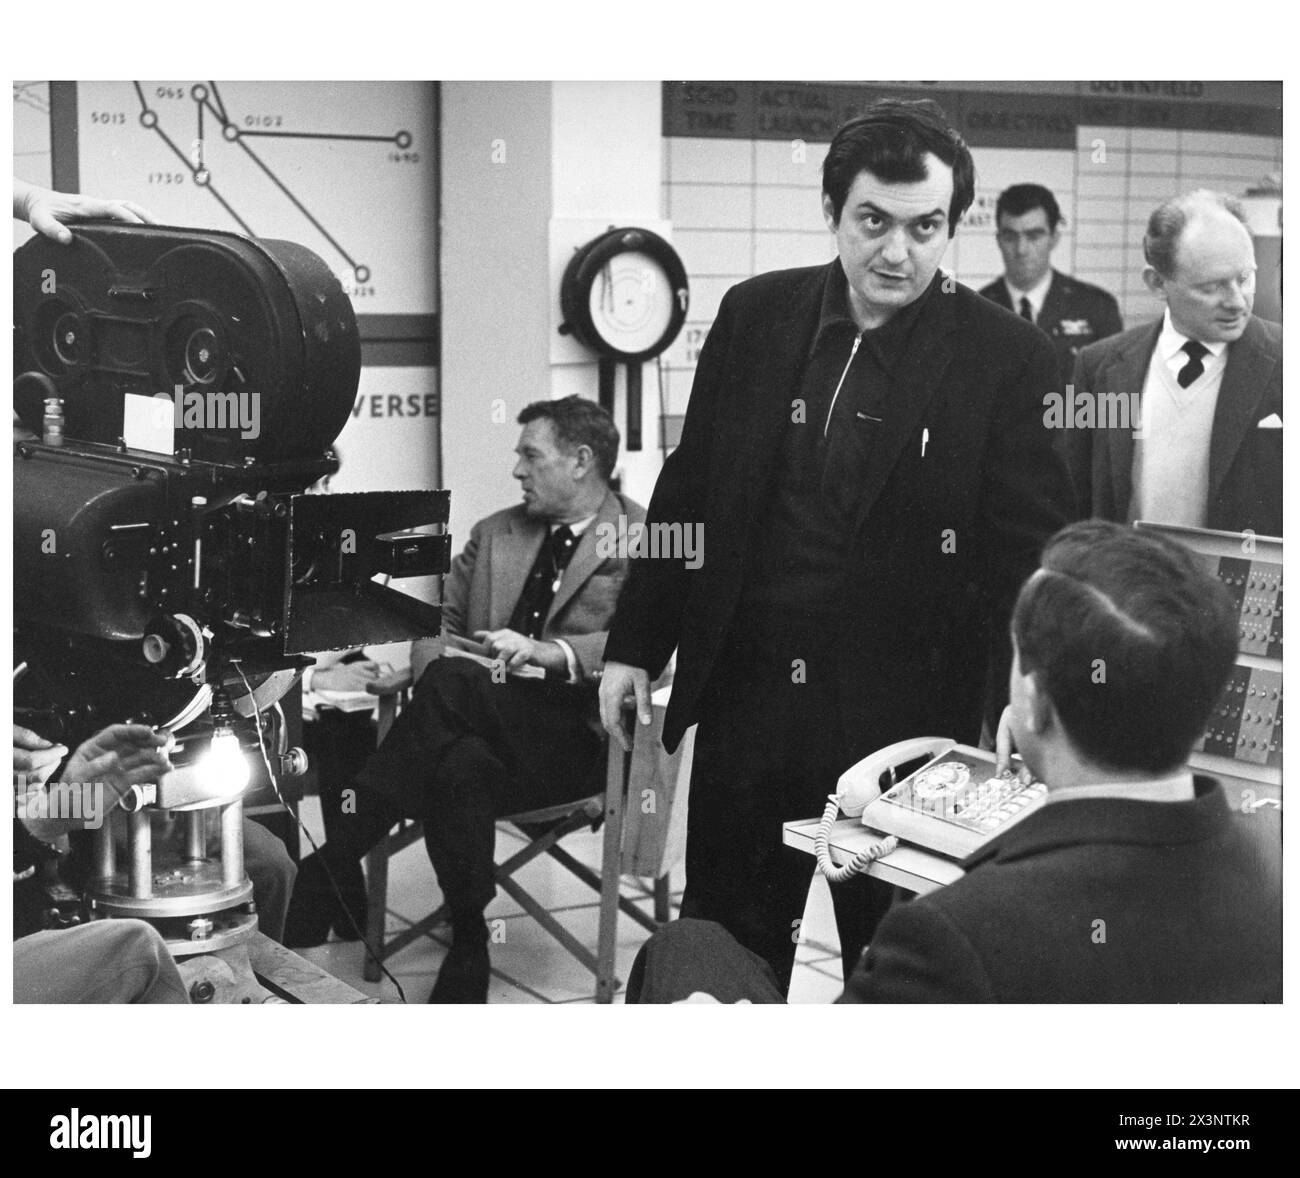 Director STANLEY KUBRICK talks to PETER SELLERS in costume for his role as Group Captain Lionel Mandrake on the set of DR. STRANGELOVE or : How I Learned to Stop Worrying and Love the Bomb 1964.Sitting behind him is STERLING HAYDEN who played Brigadier General Jack D. Ripper. Book PETER GEORGE Screenplay STANLEY KUBRICK, TERRY SOUTHERN and PETER GEORGE Production Design KEN ADAM Hawk Films / Columbia Pictures Stock Photo